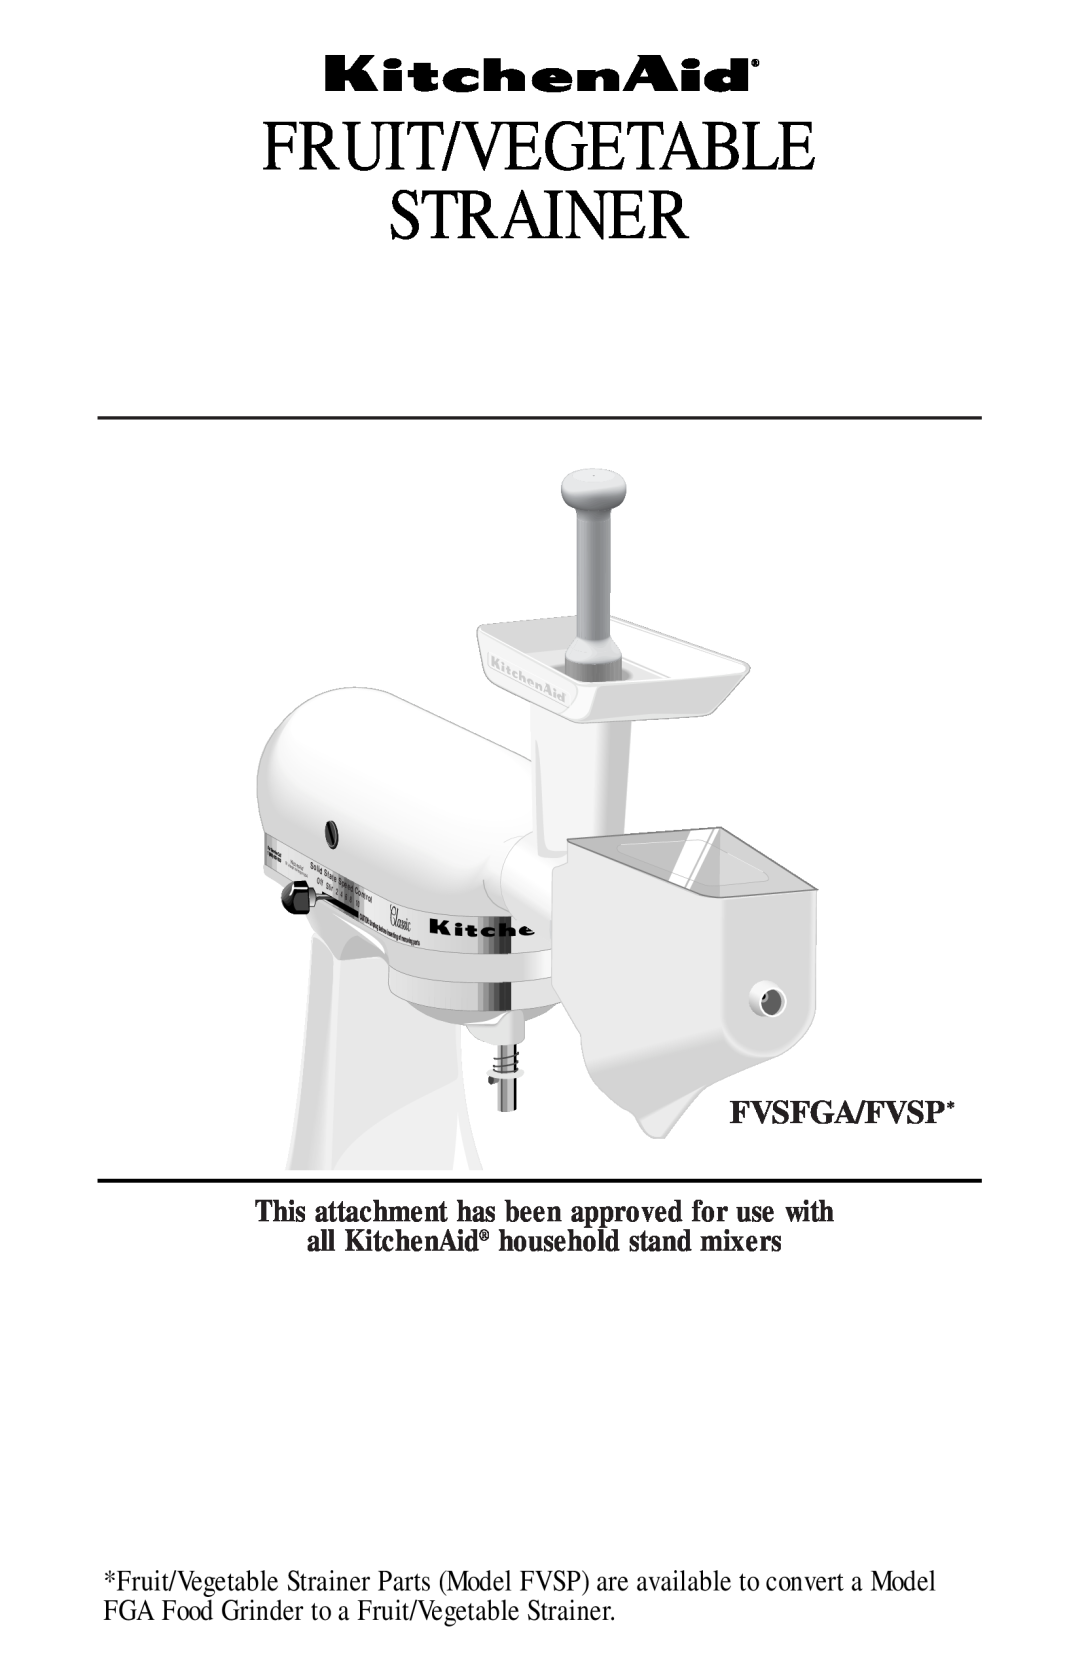 KitchenAid FVSP manual This attachment has been approved for use with, all KitchenAid household stand mixers, Fvsfga/Fvsp 